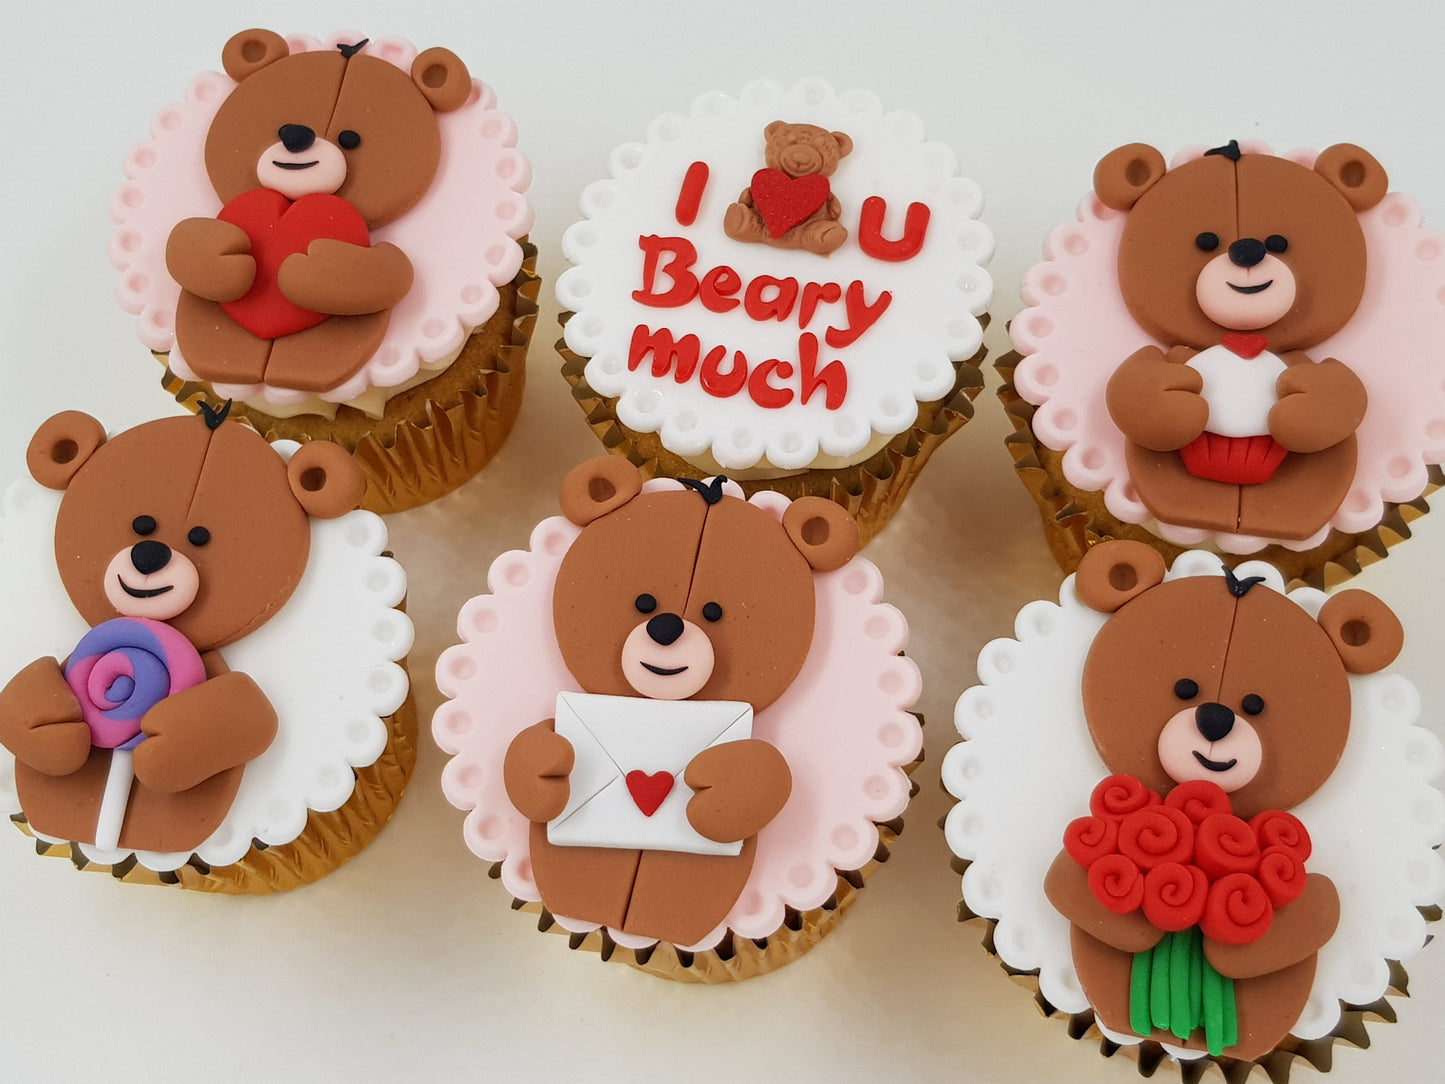 Valentine's Day Cupcake Set - Beary Love - Cuppacakes - Singapore's Very Own Cupcakes Shop